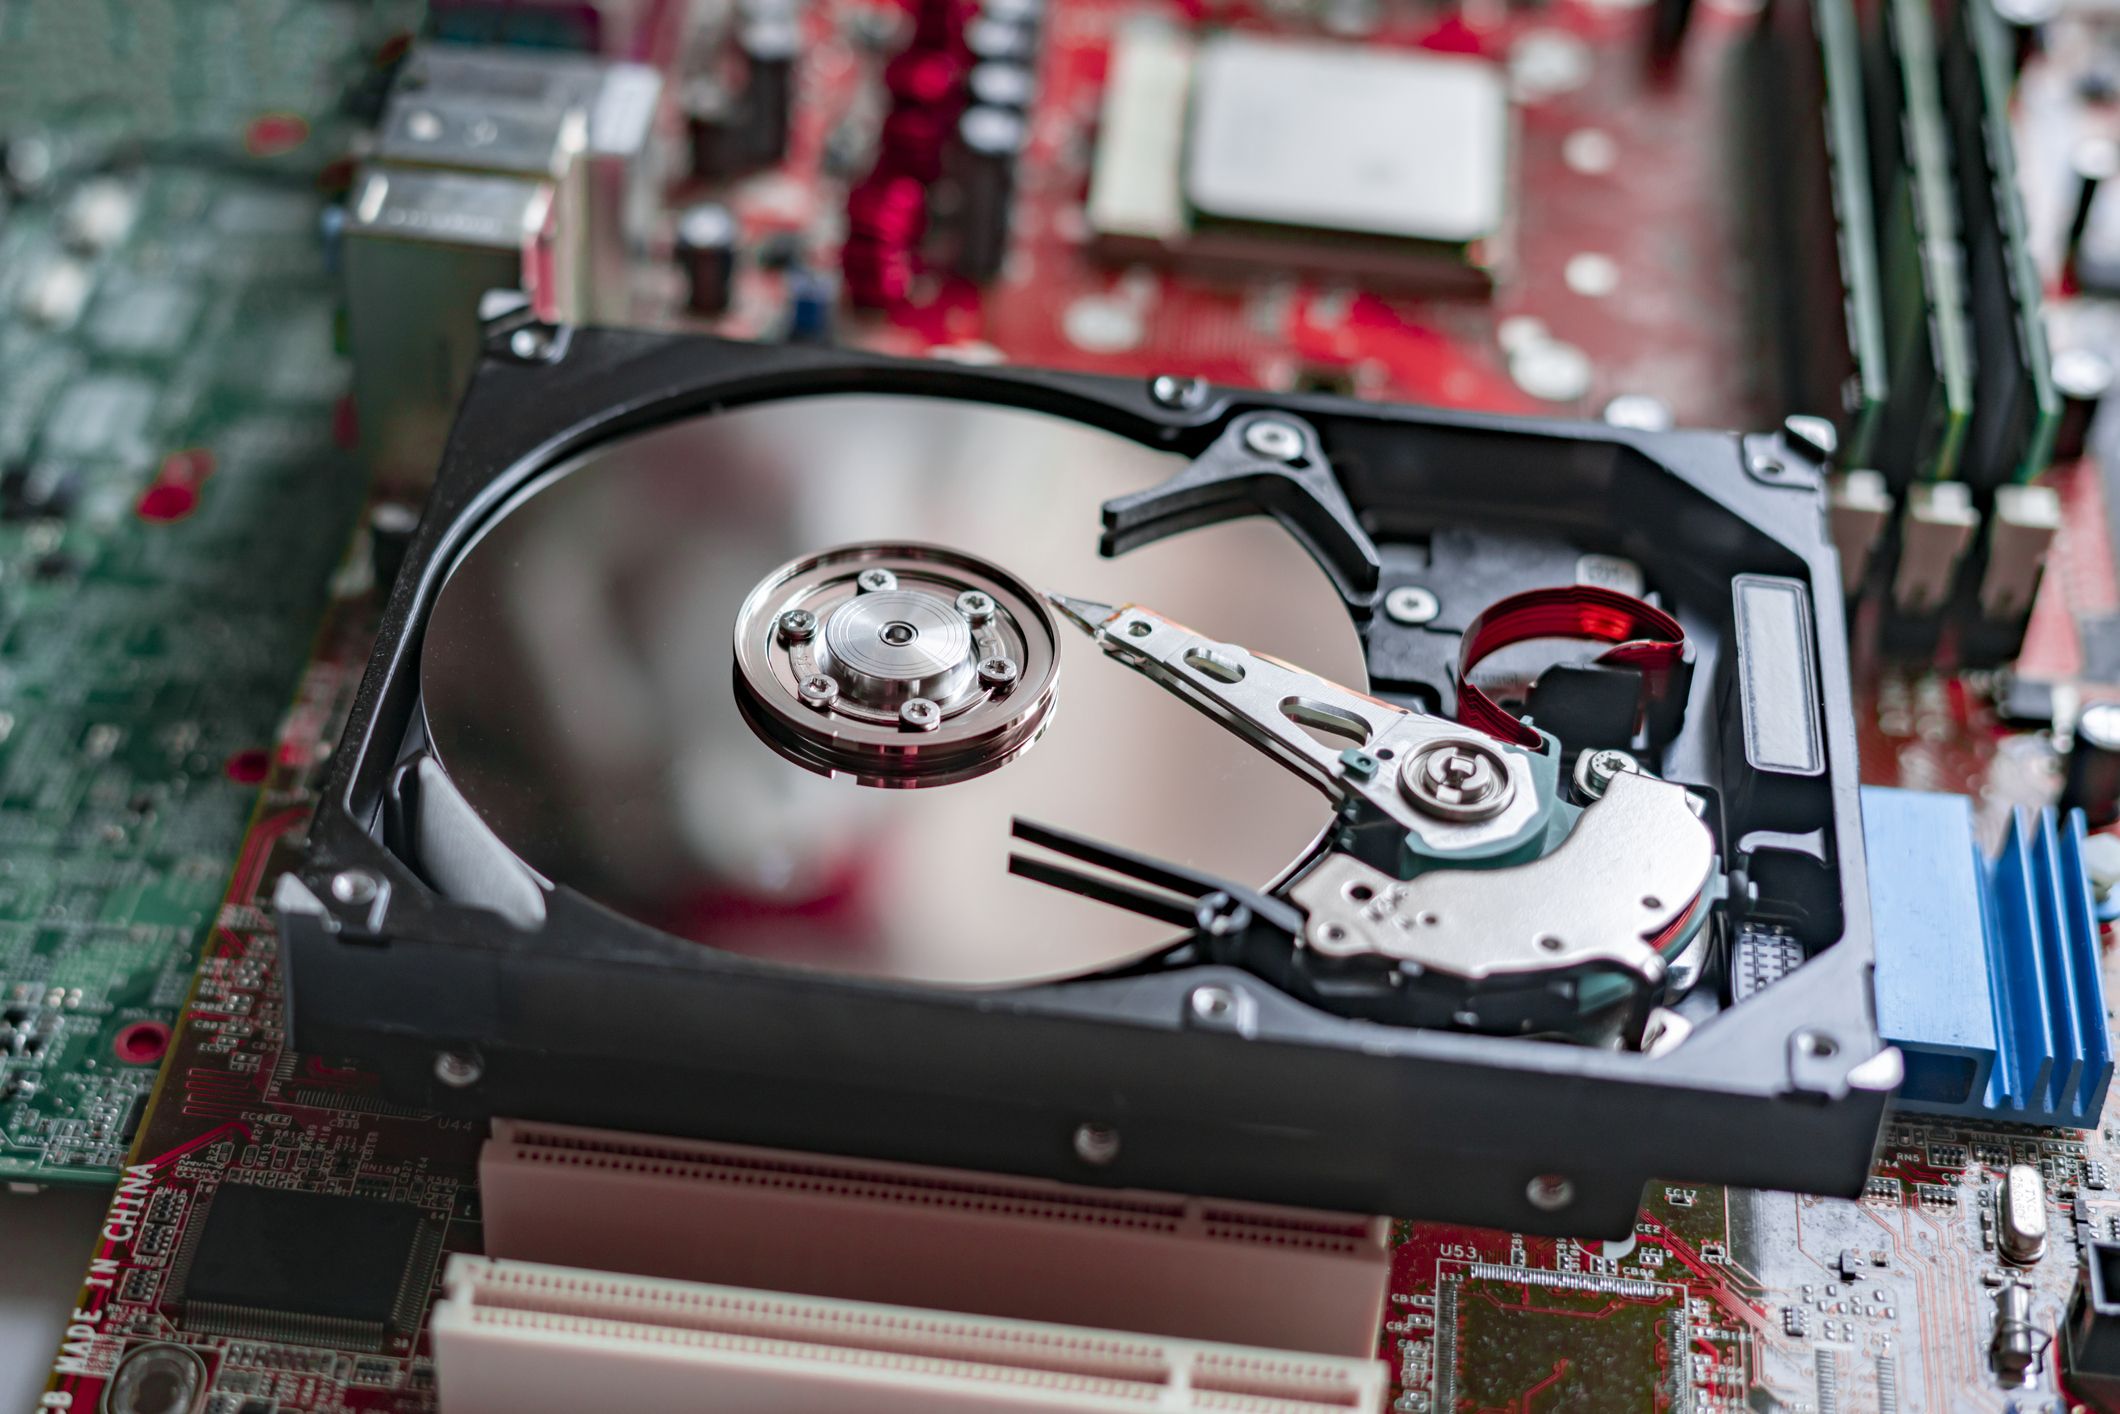 PC components explained: how to pick the best components for your PC